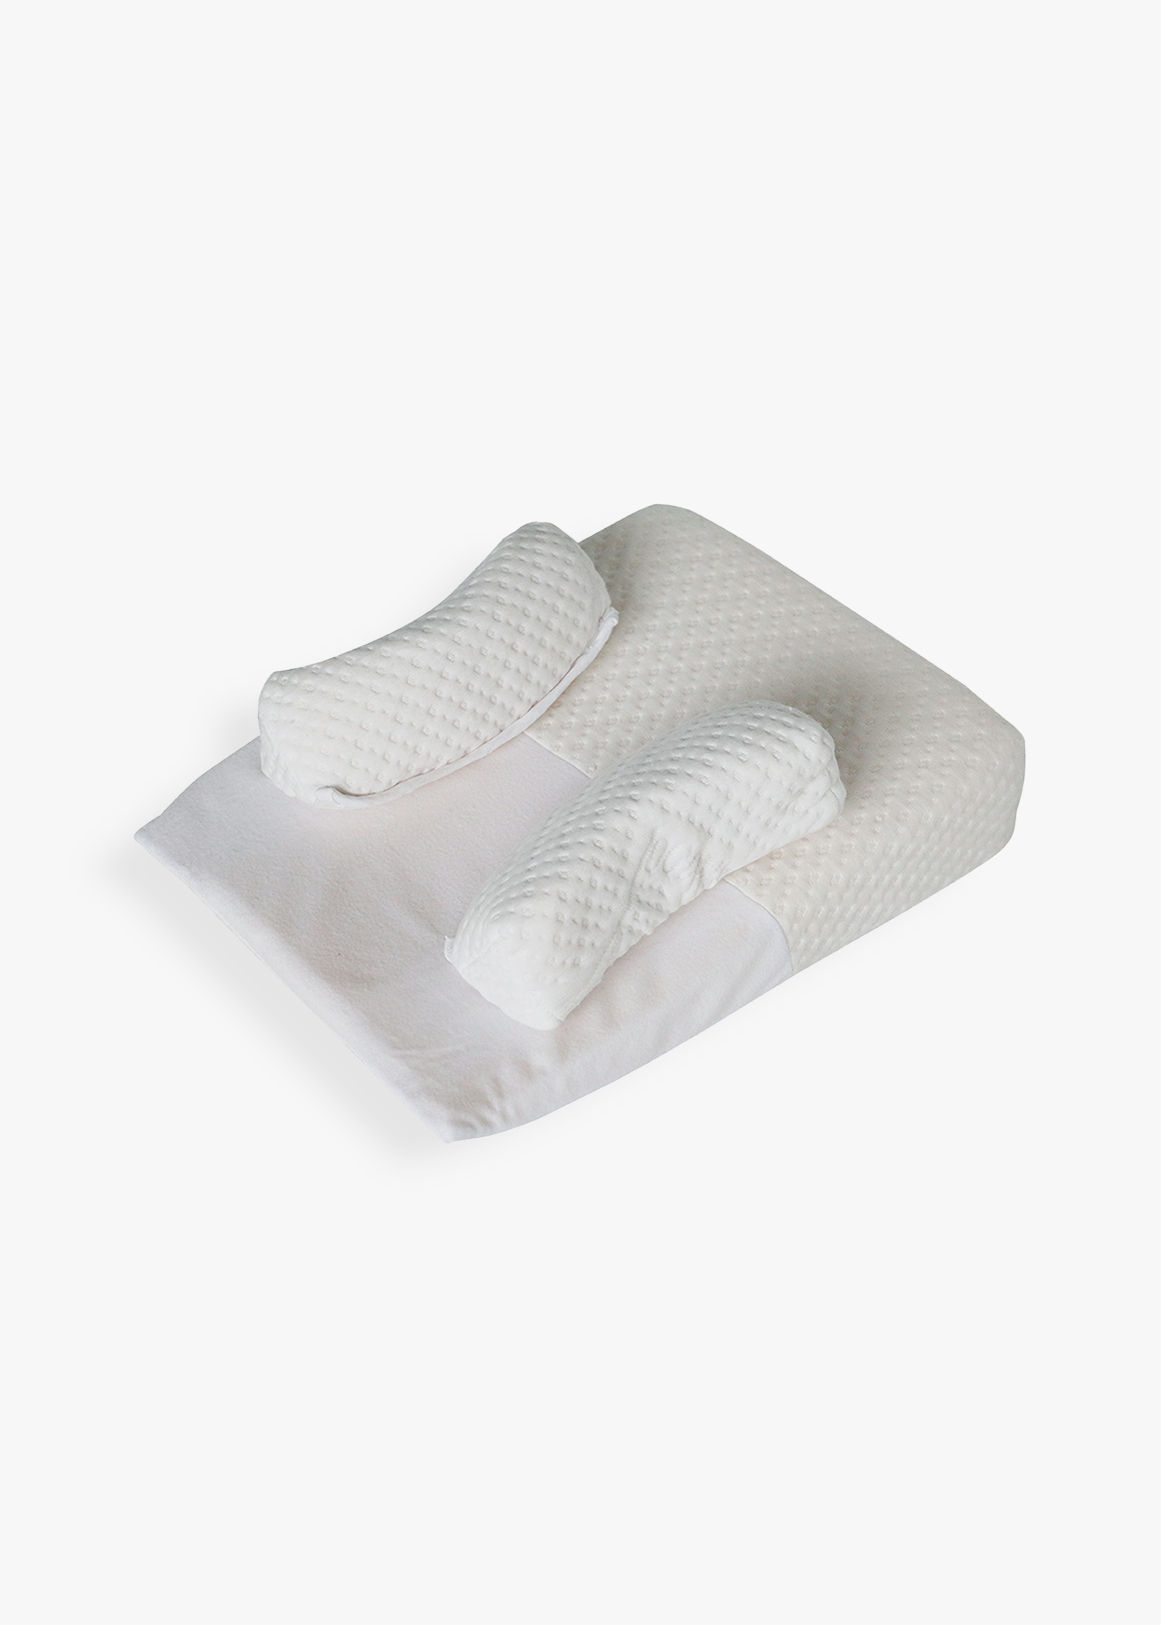 Buy the Nanotect Easy Breather Mattress- Large Cot from Babies-R-Us Online